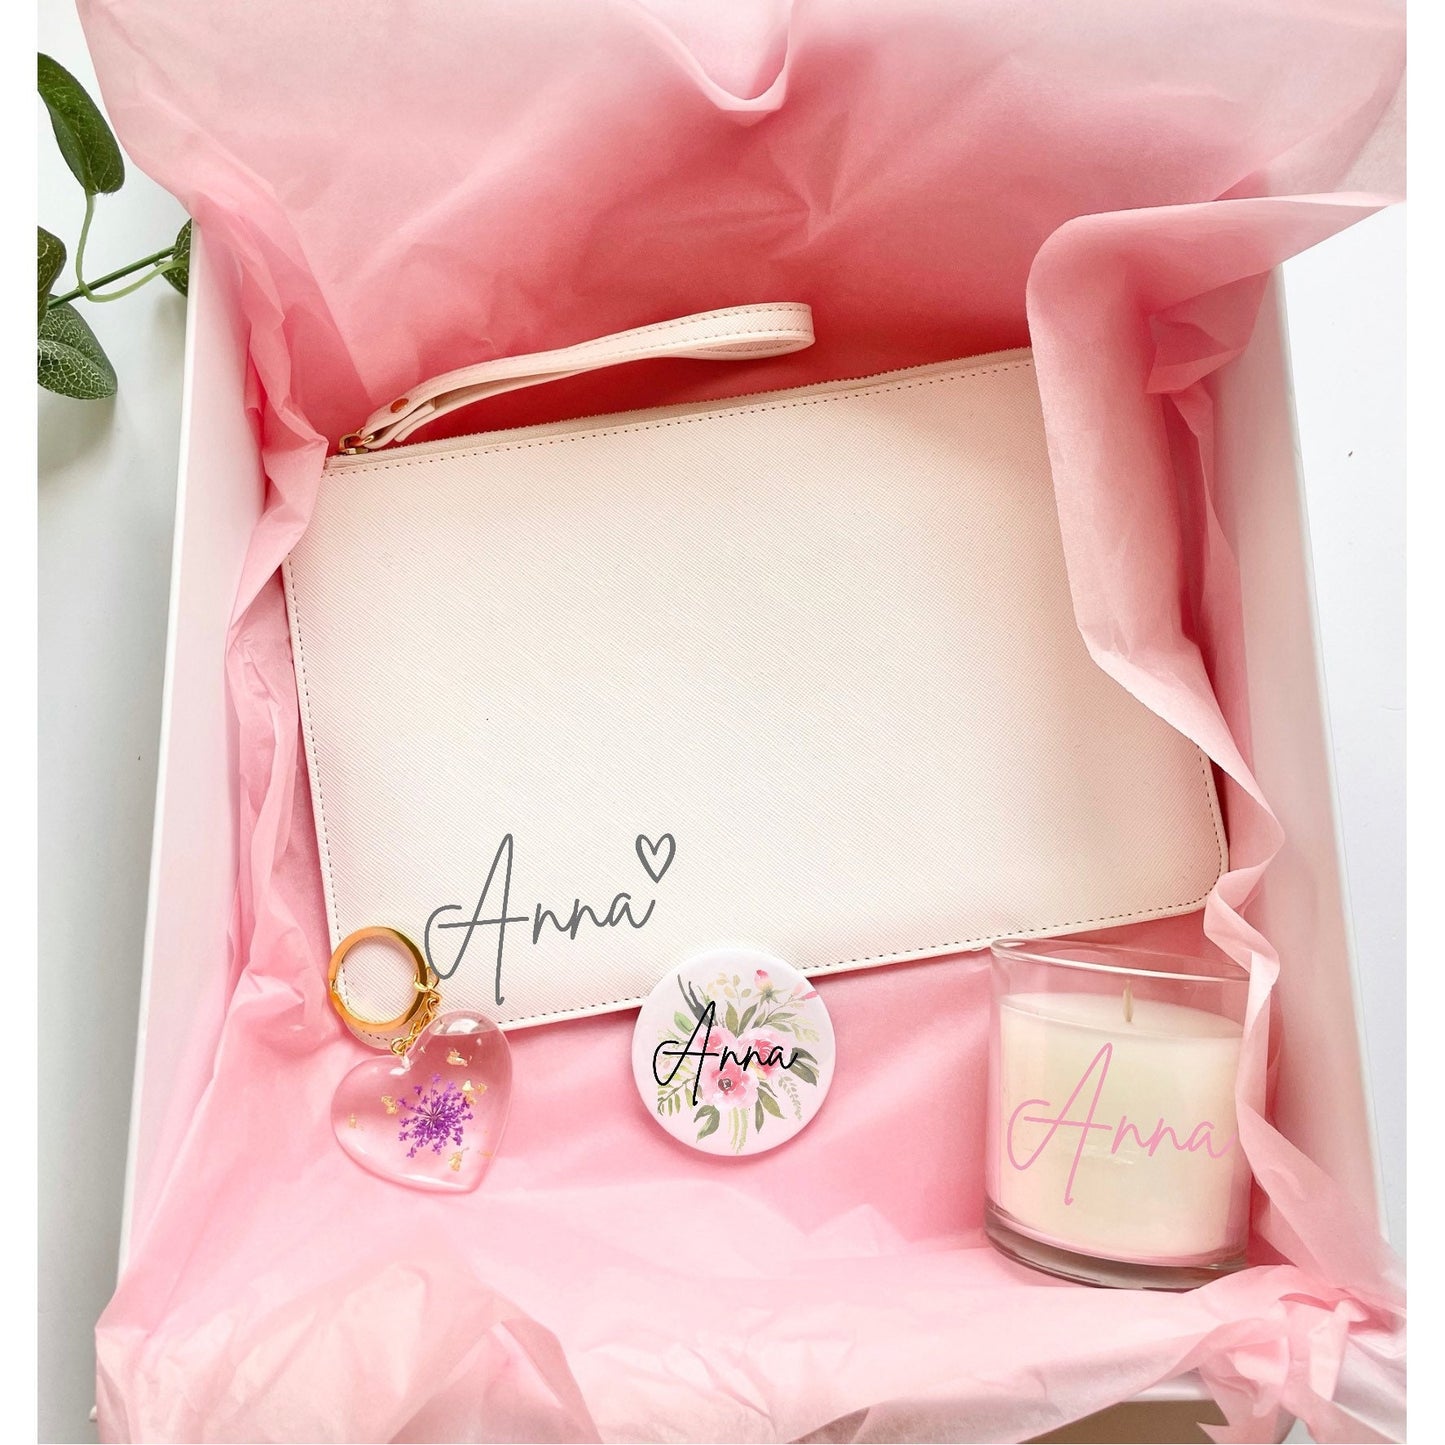 Personalised gift set for her, Mother’s Day gift set, mum gifts, clutch bag, candle, floral design compact mirror, gold leaf resin keyring